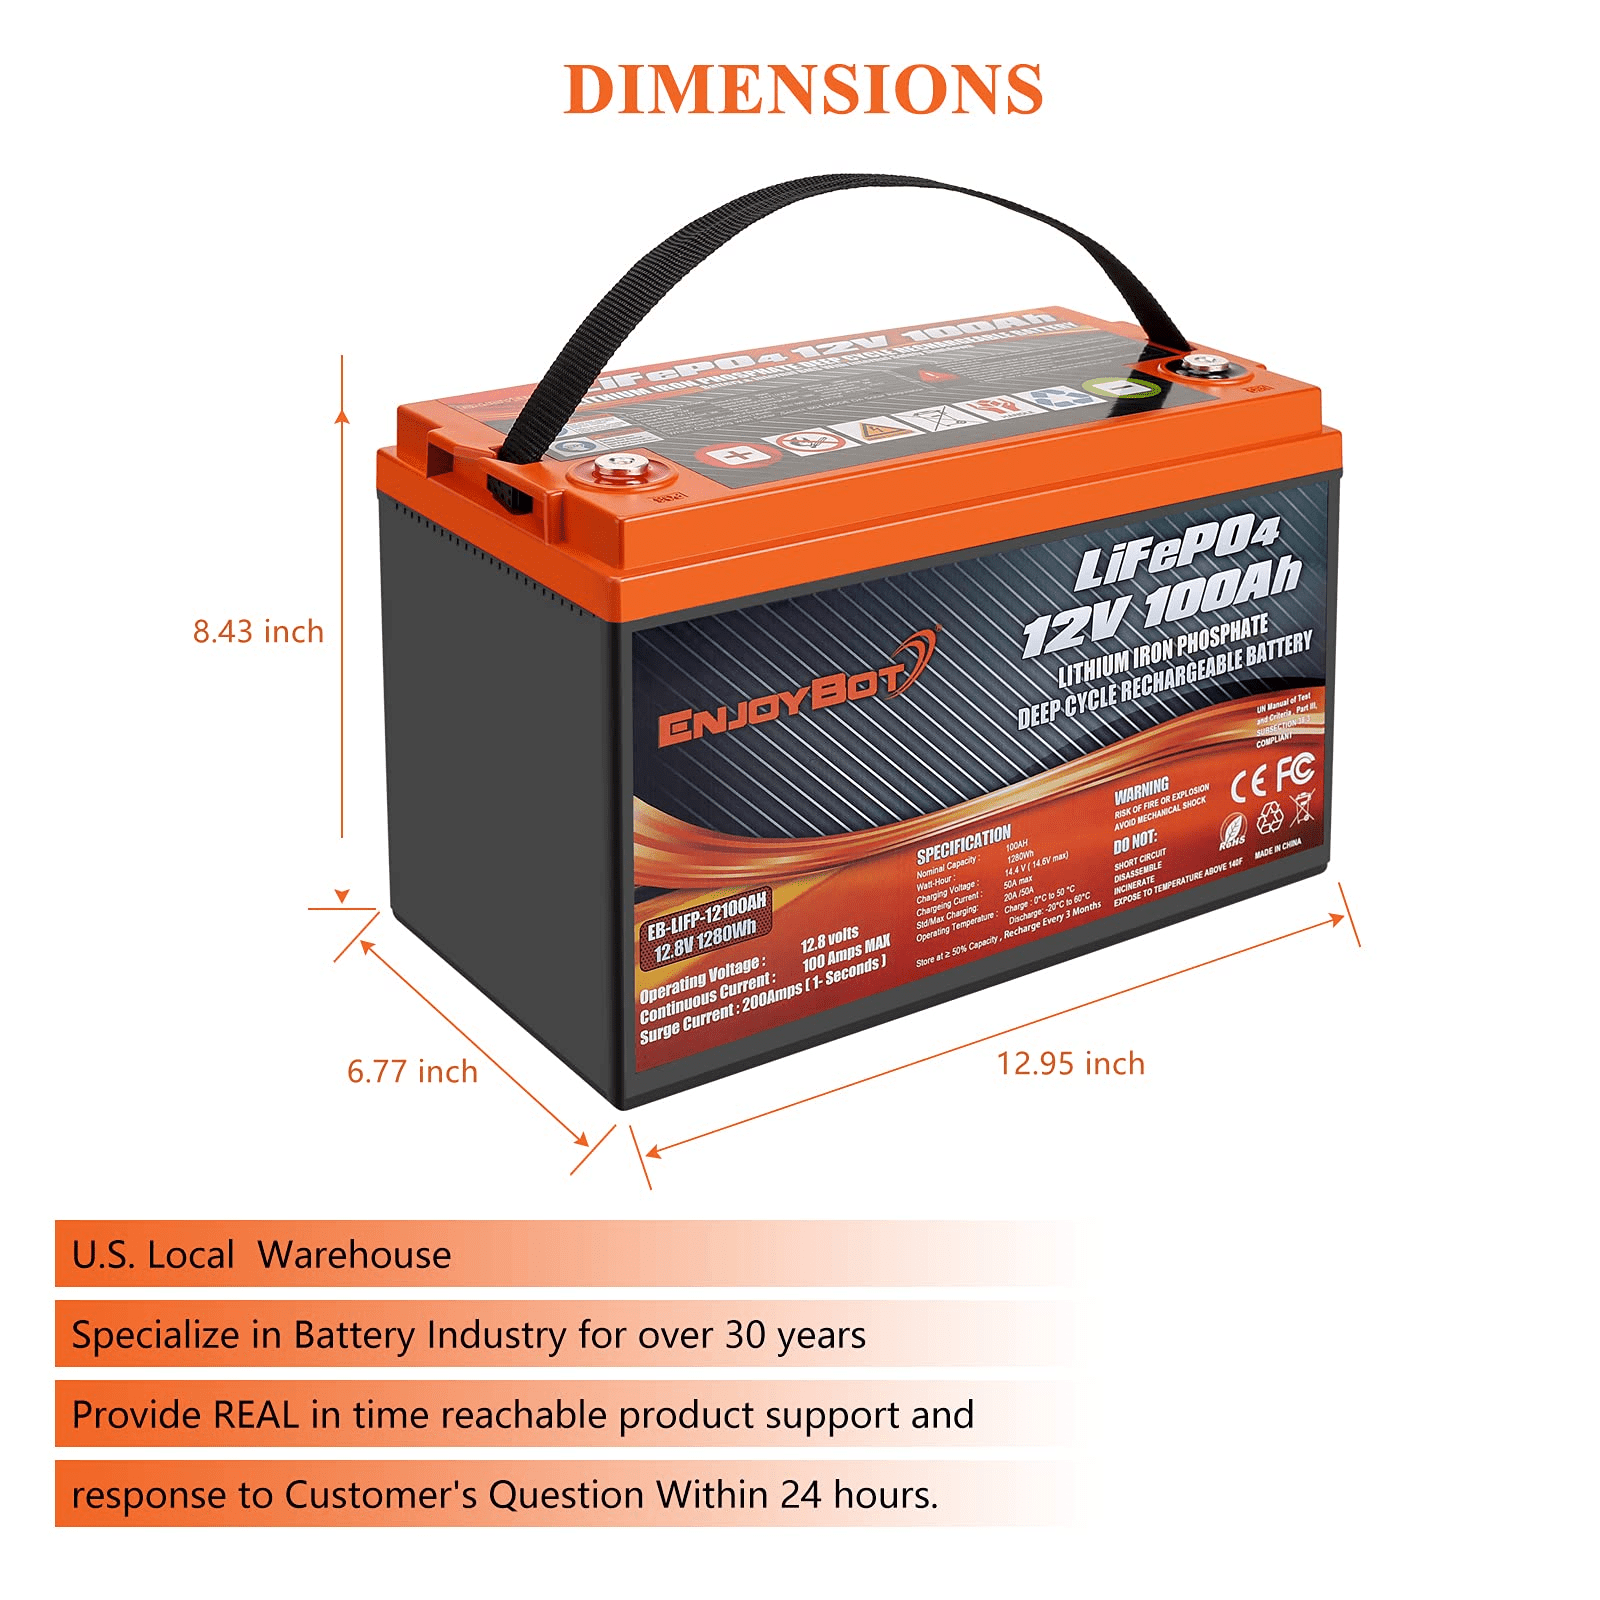 Enjoybot 12V 100Ah Lithium Battery LiFePO4 Deep Cycle, Built-in 100A BMS,  2000-5000 Cycles, for RV, Boat, Golf Cart, Car, Solar Power Backup, Marine,  off-Grid, Replace for SLA/AGM 